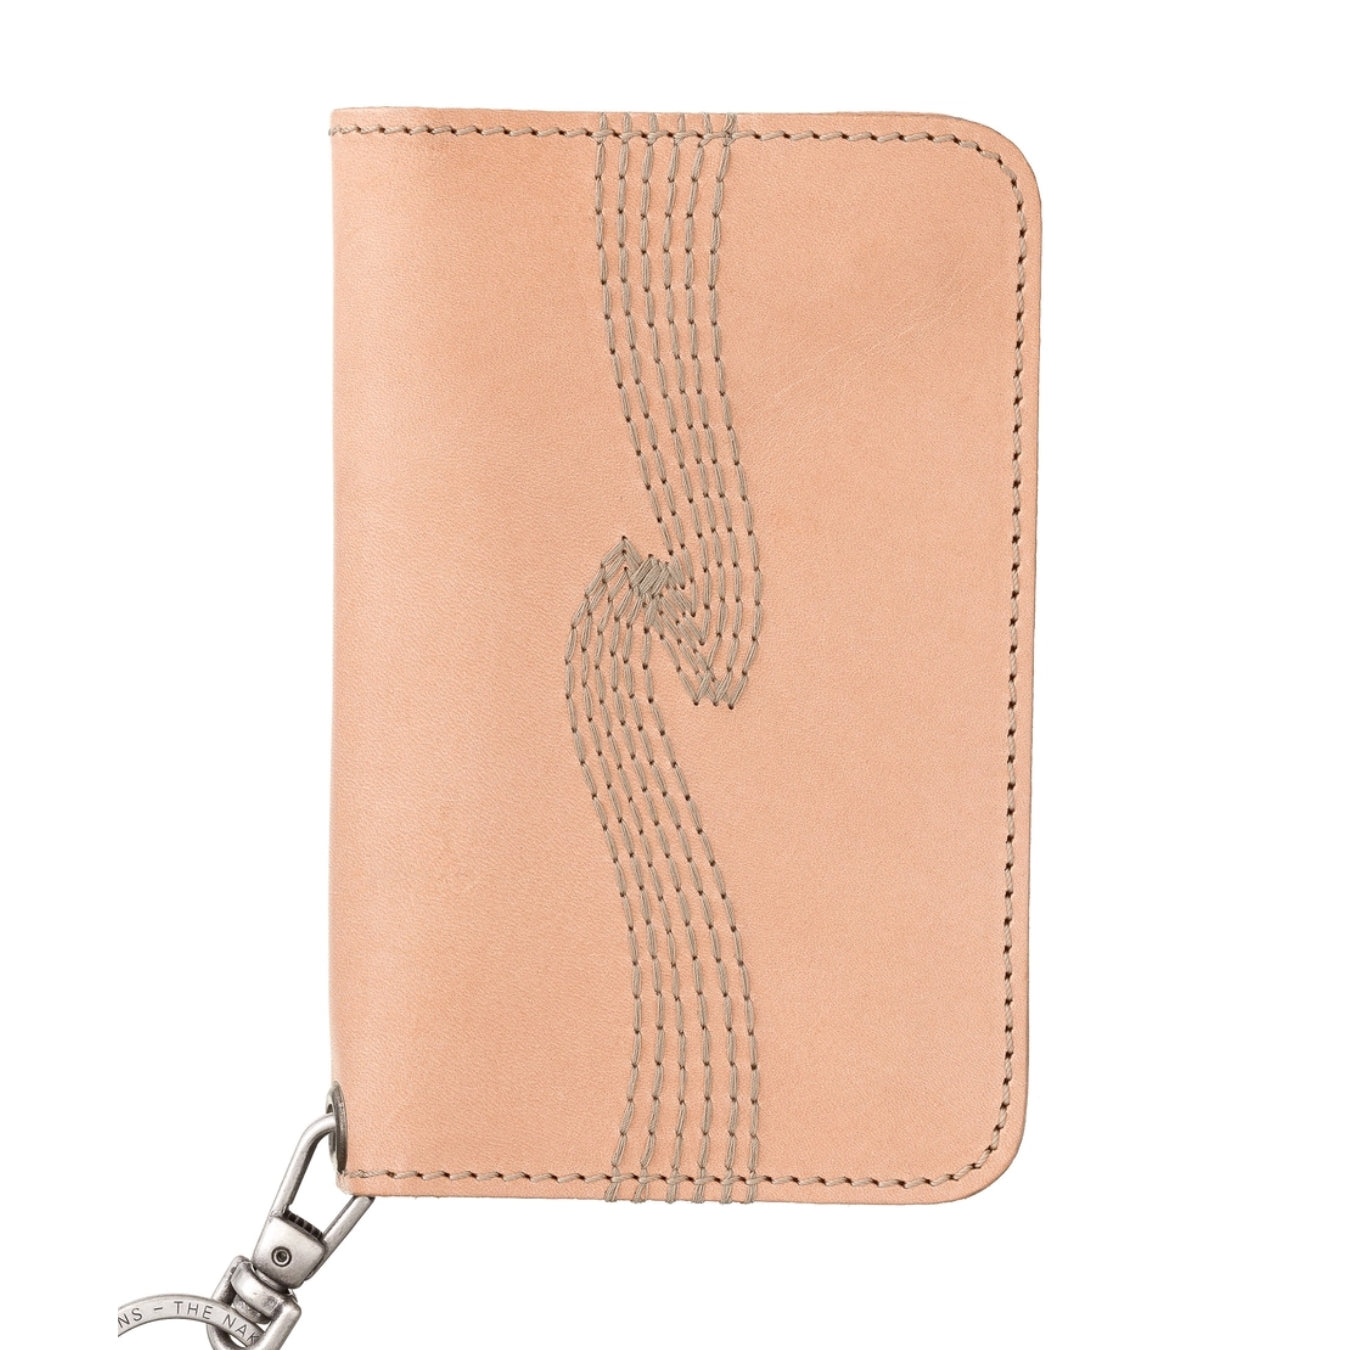 Alfredsson Chain Wallet-Natural l Nudie Jeans